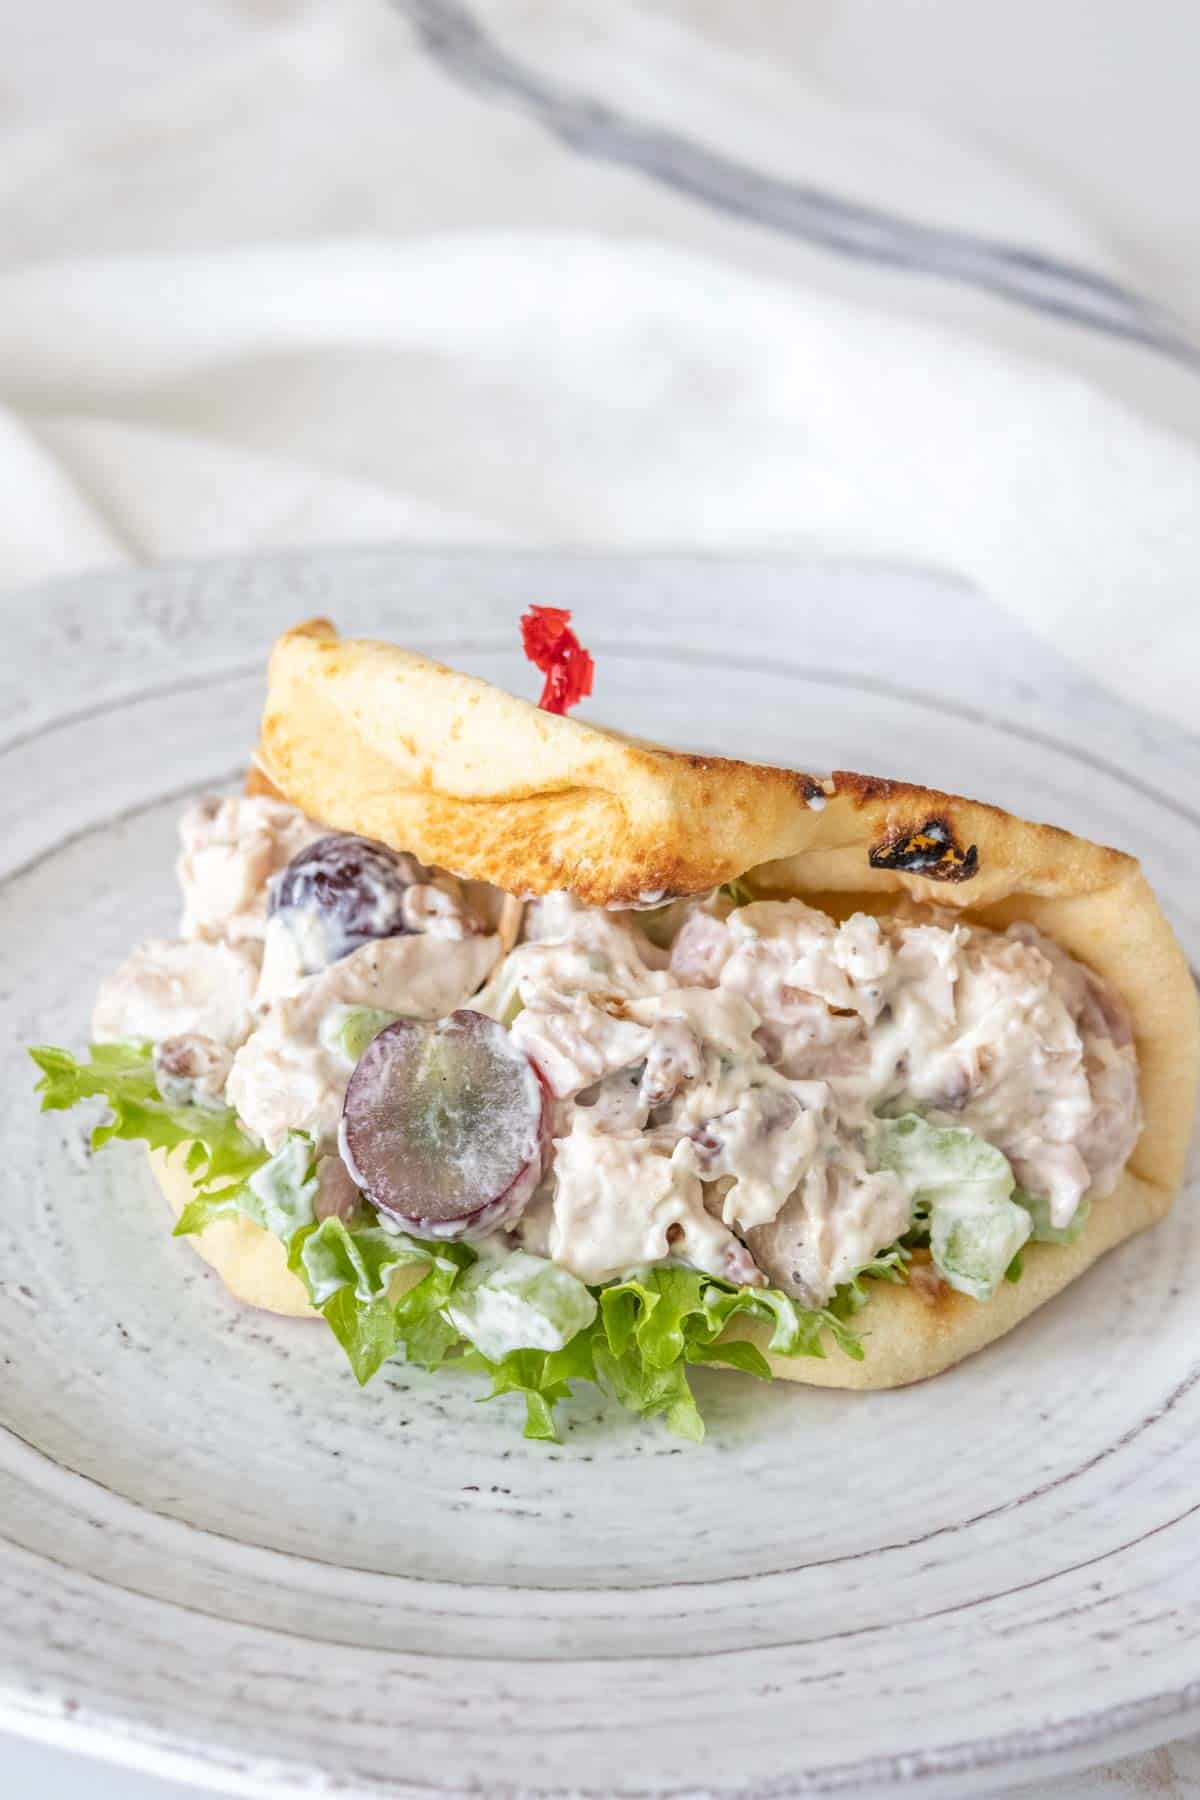 Chicken salad with grapes in a folded over flatbread on a gray plate.